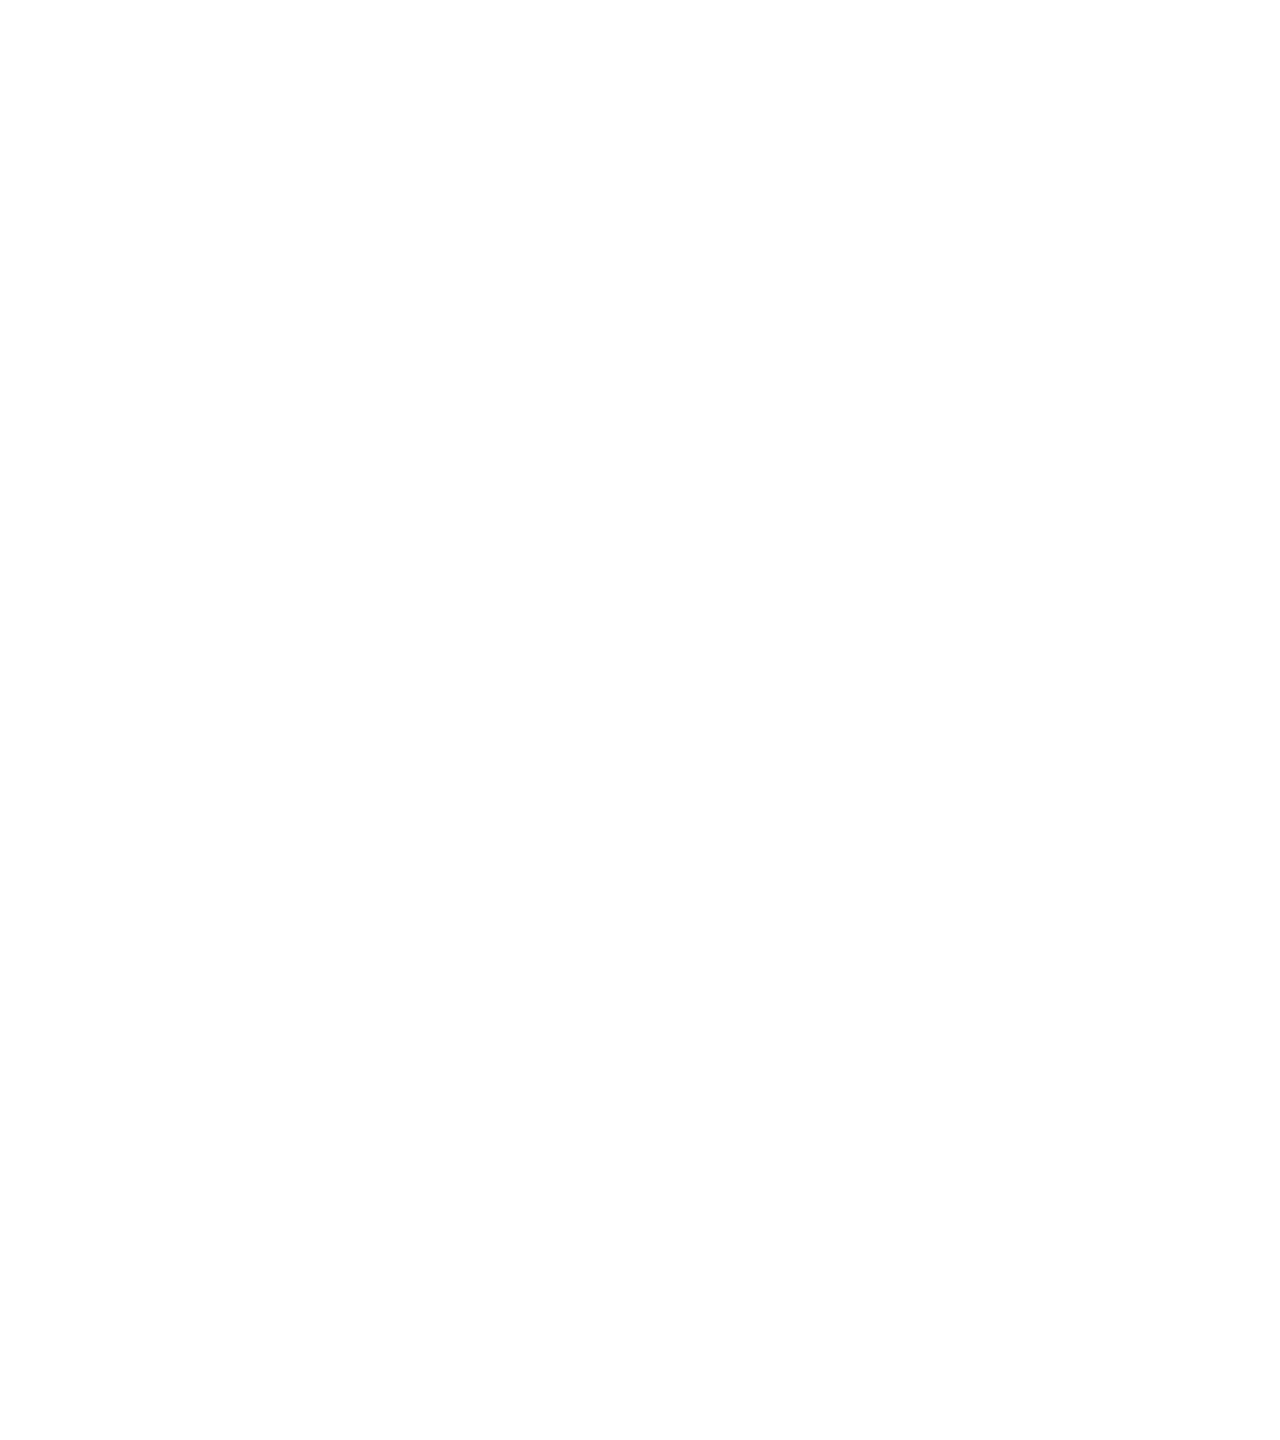 "We aim for 100% natural"